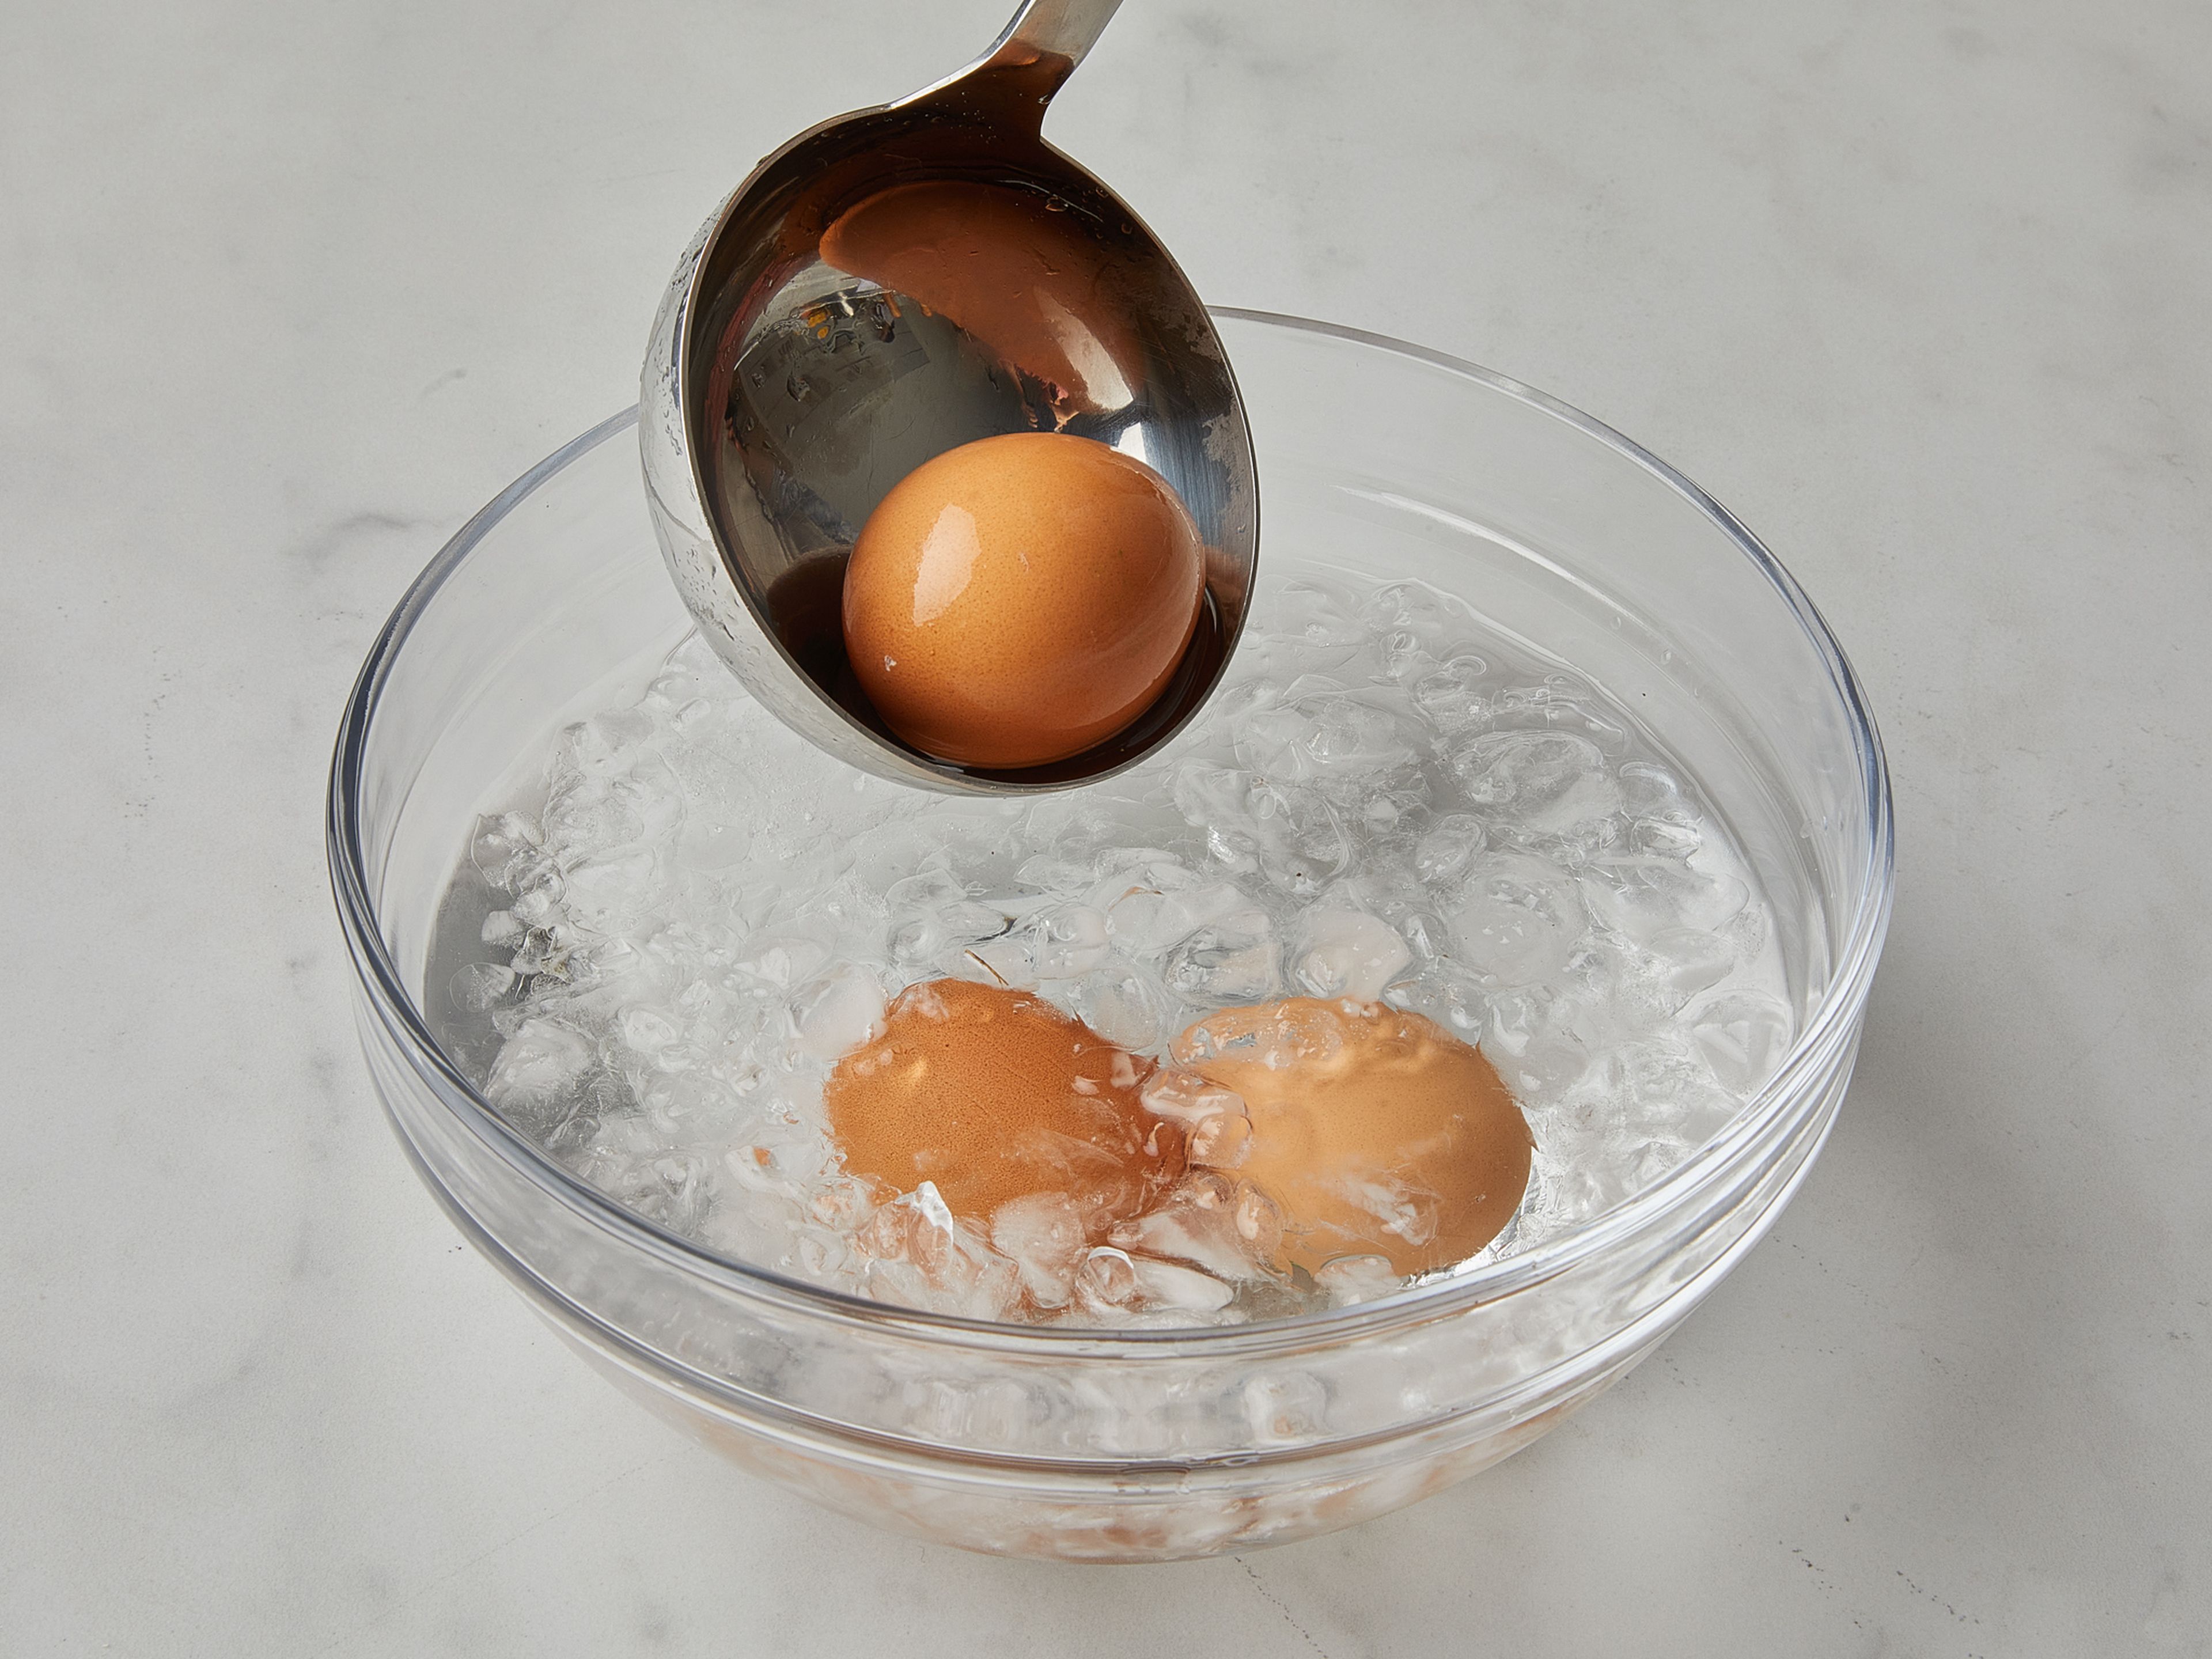 Bring the eggs to room temperature. Bring a pot of water to a simmer. Using a ladle, add eggs in gently and simmer for approx. 6 min. Immediately transfer eggs to a bowl of ice water to stop the cooking process.